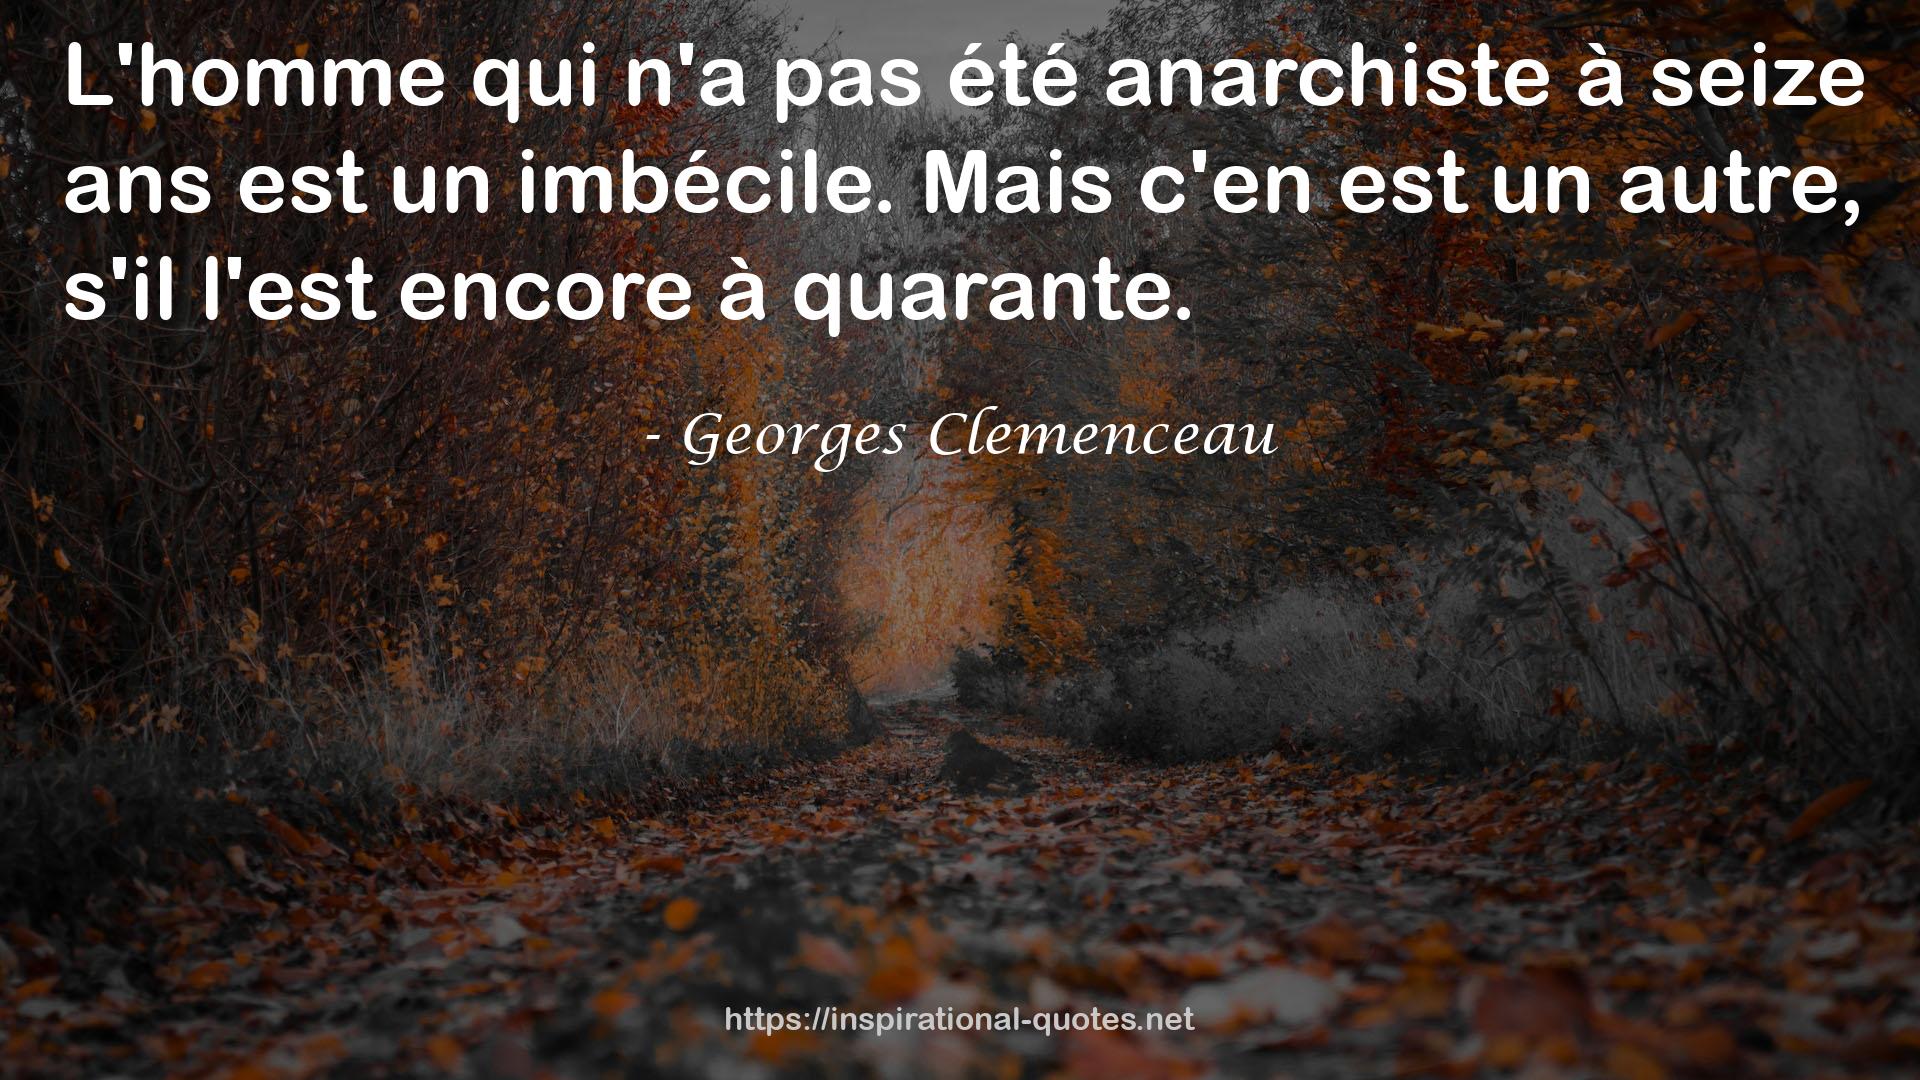 Georges Clemenceau QUOTES